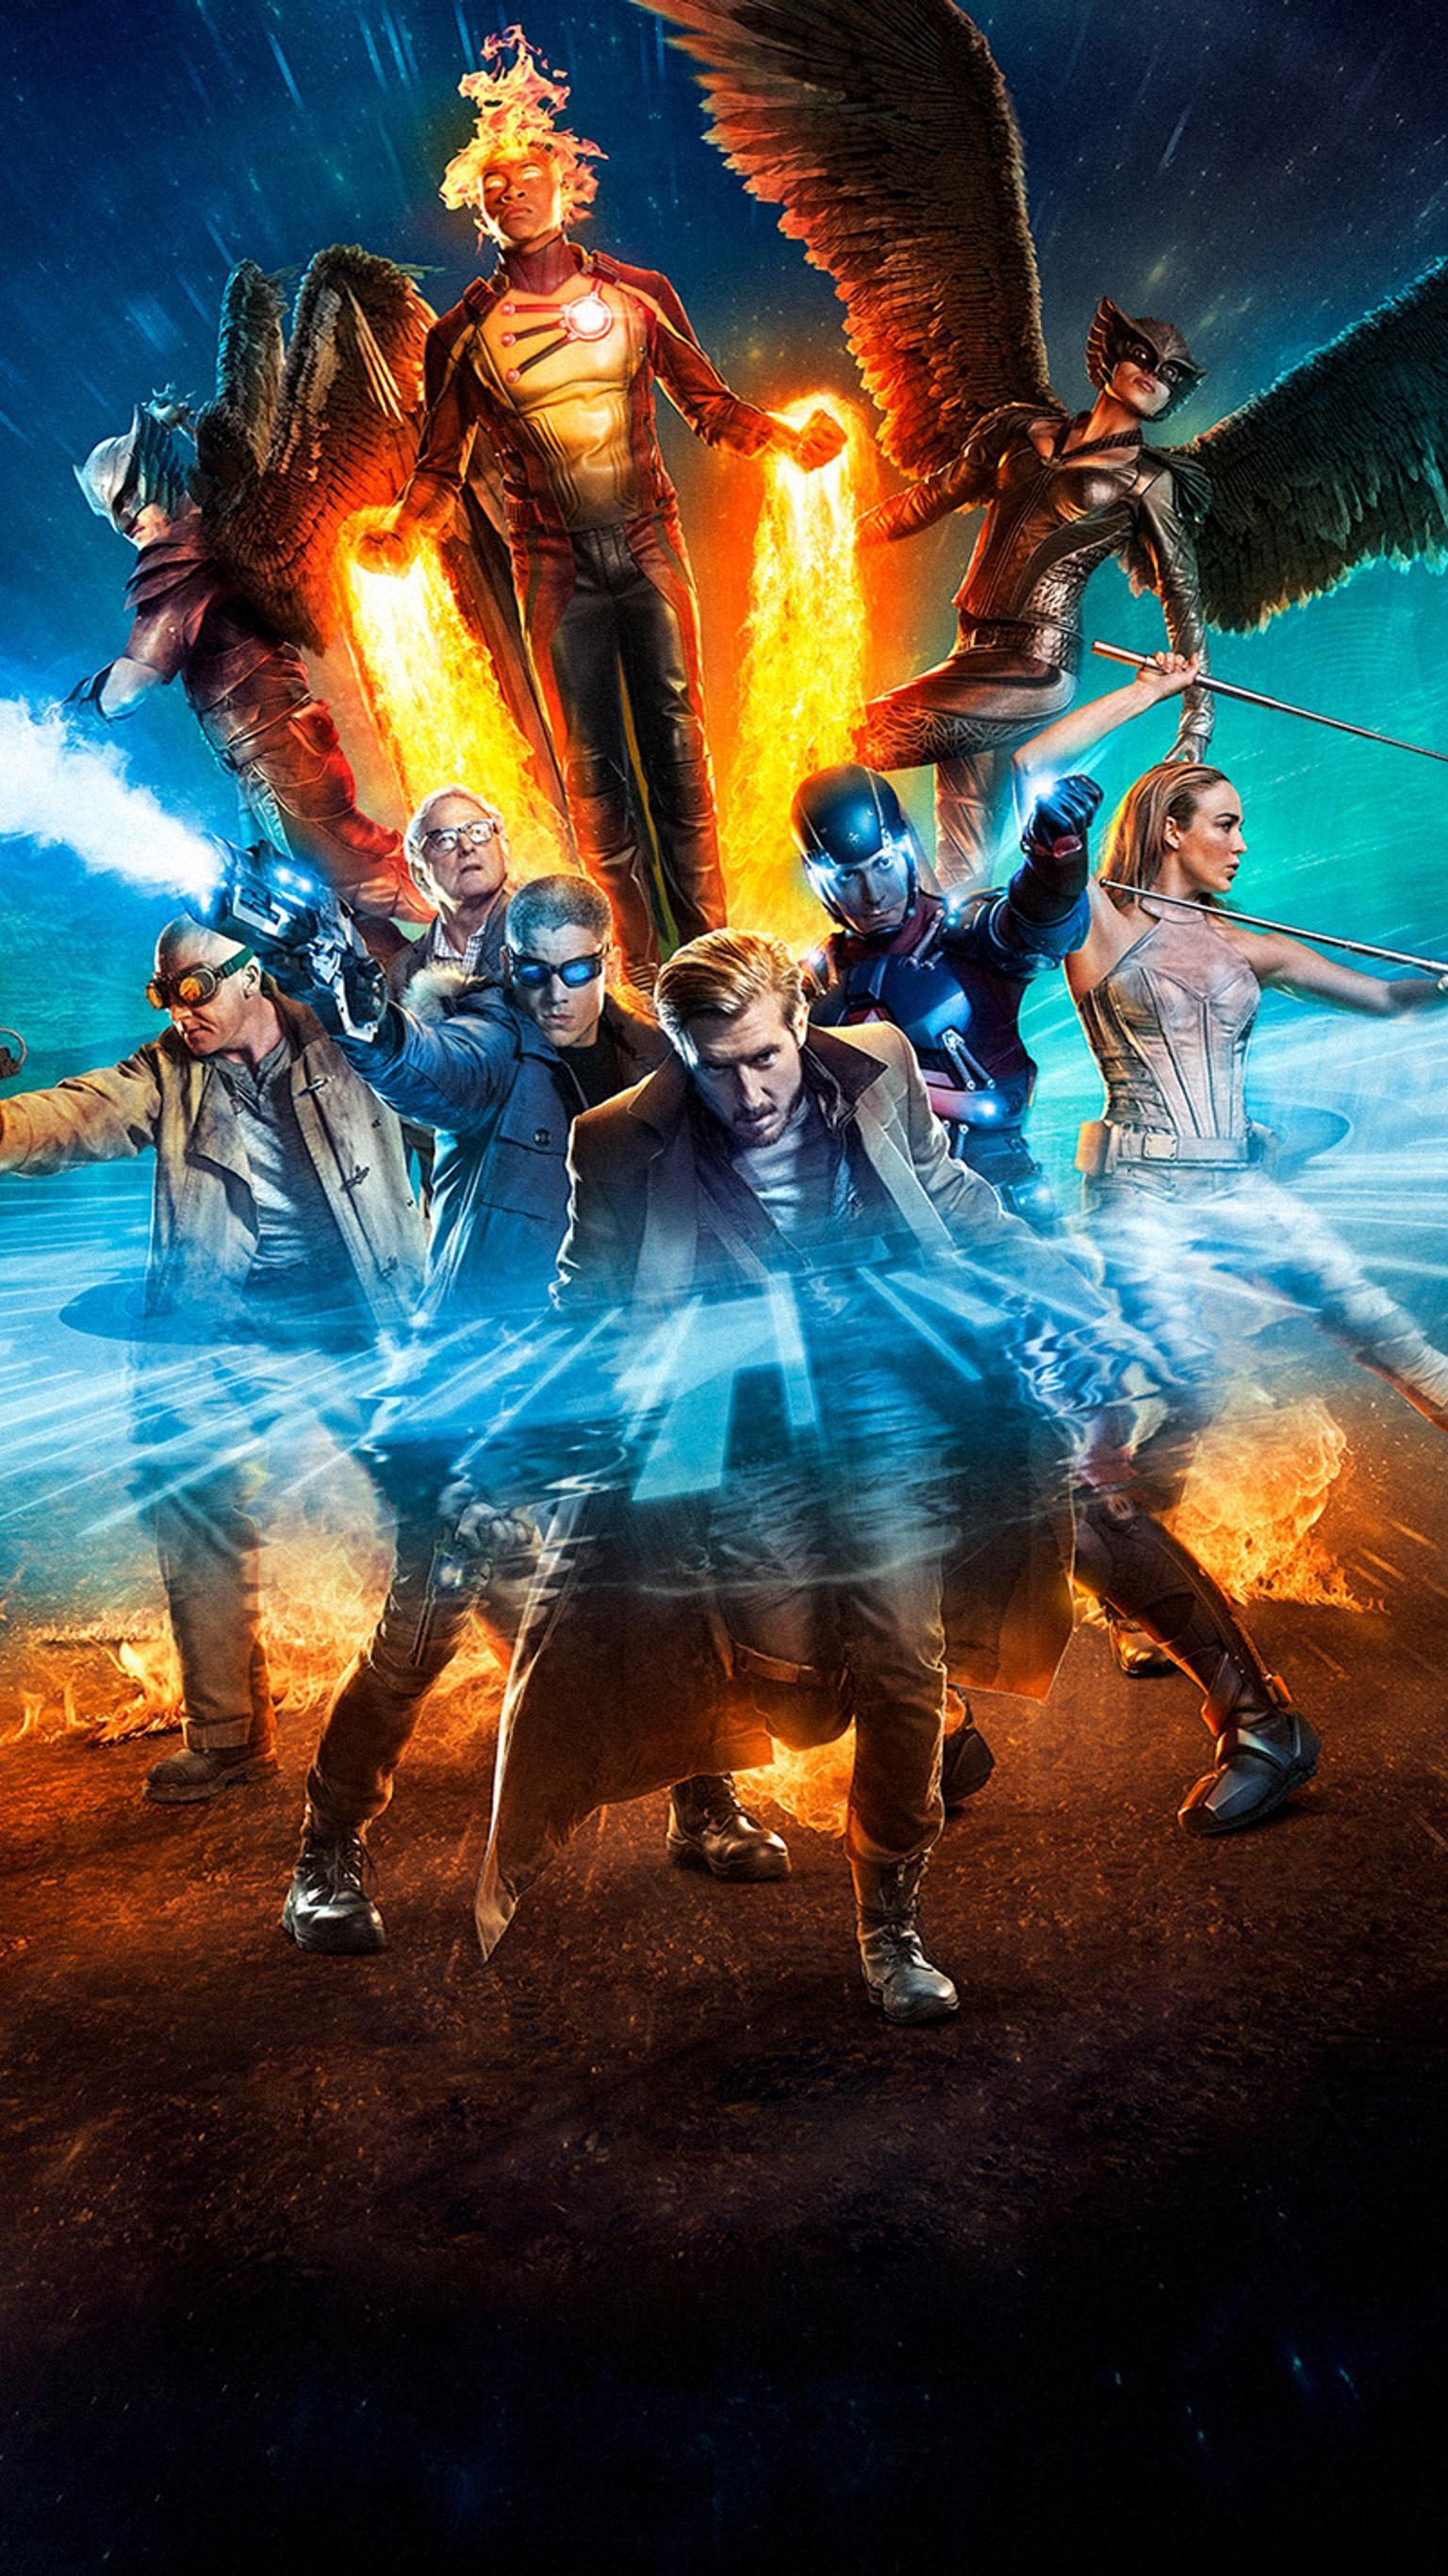 DC's Legends of Tomorrow wallpapers, Superhero team, Time-traveling adventures, Action-packed scenes, 1540x2740 HD Handy